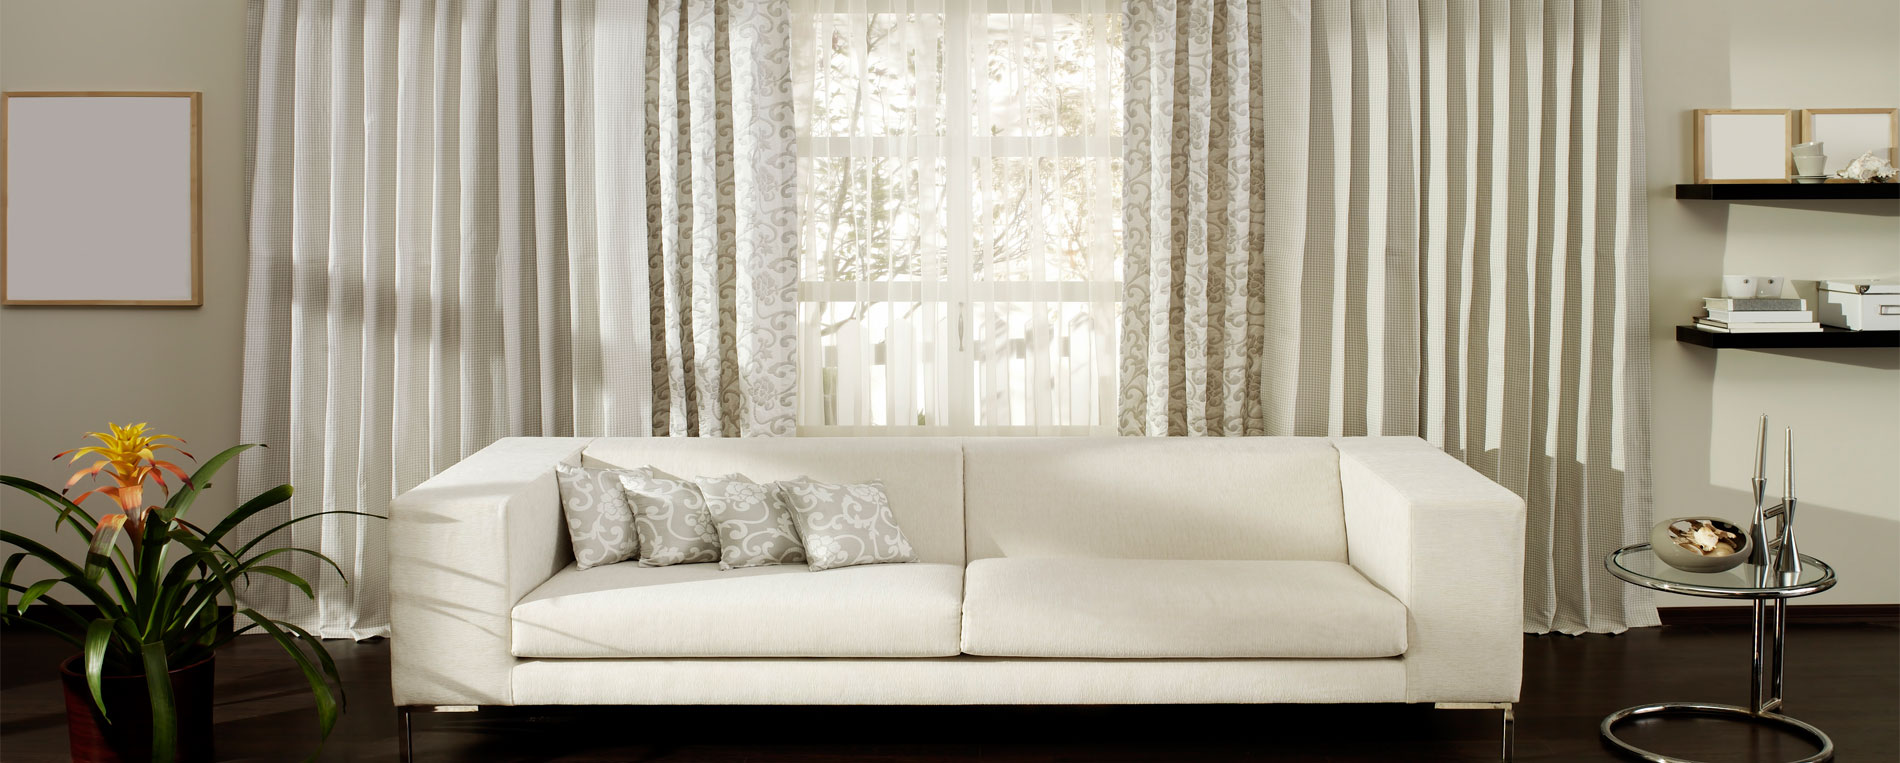 Prepare For Spring With New Window Treatments